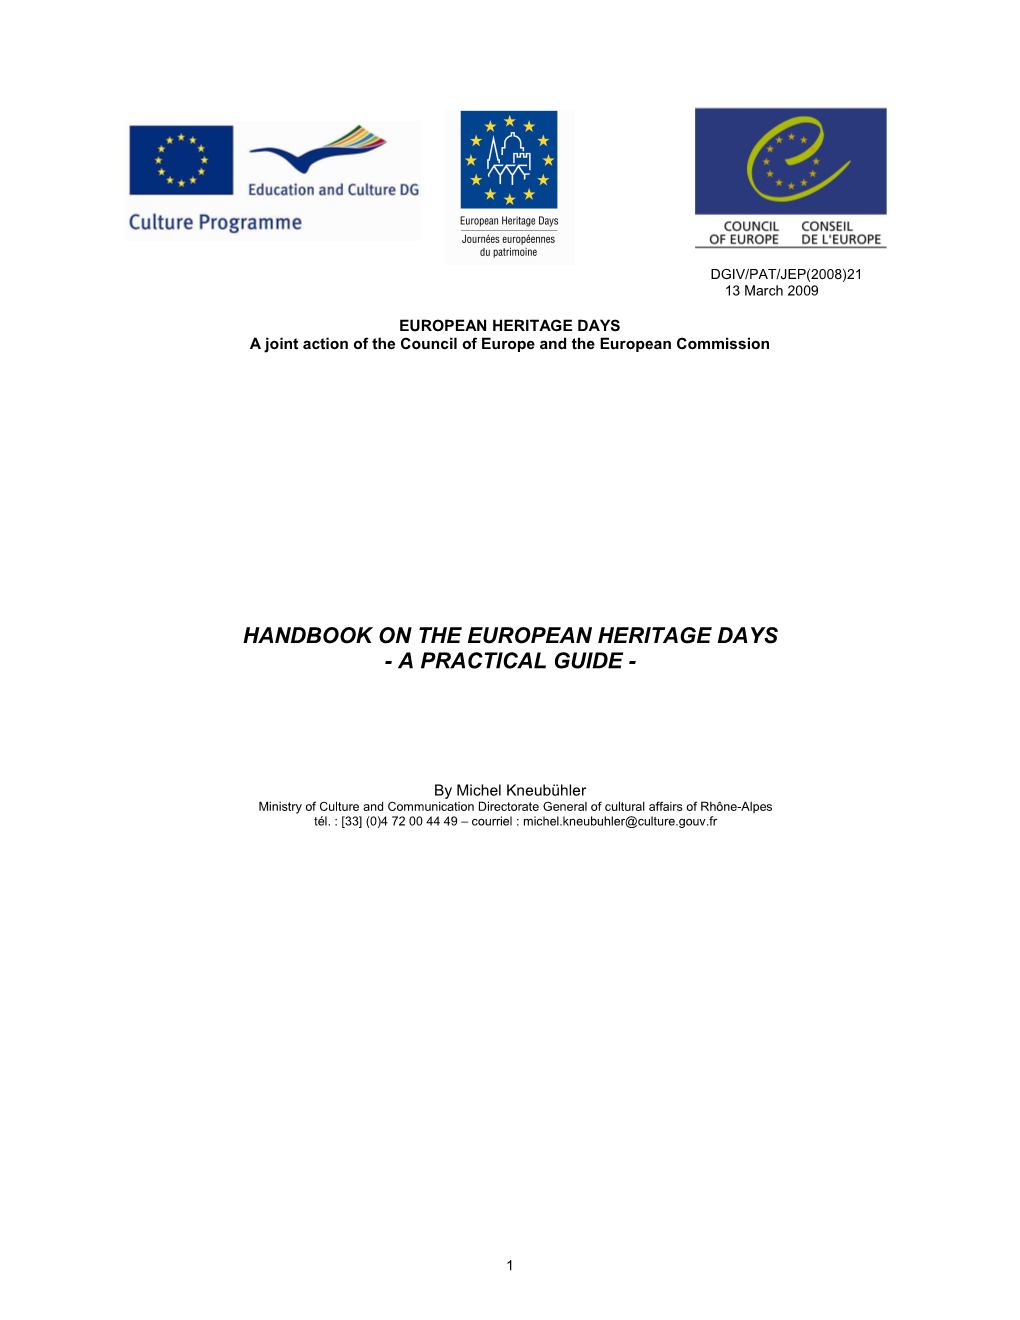 Handbook on the European Heritage Days - a Practical Guide